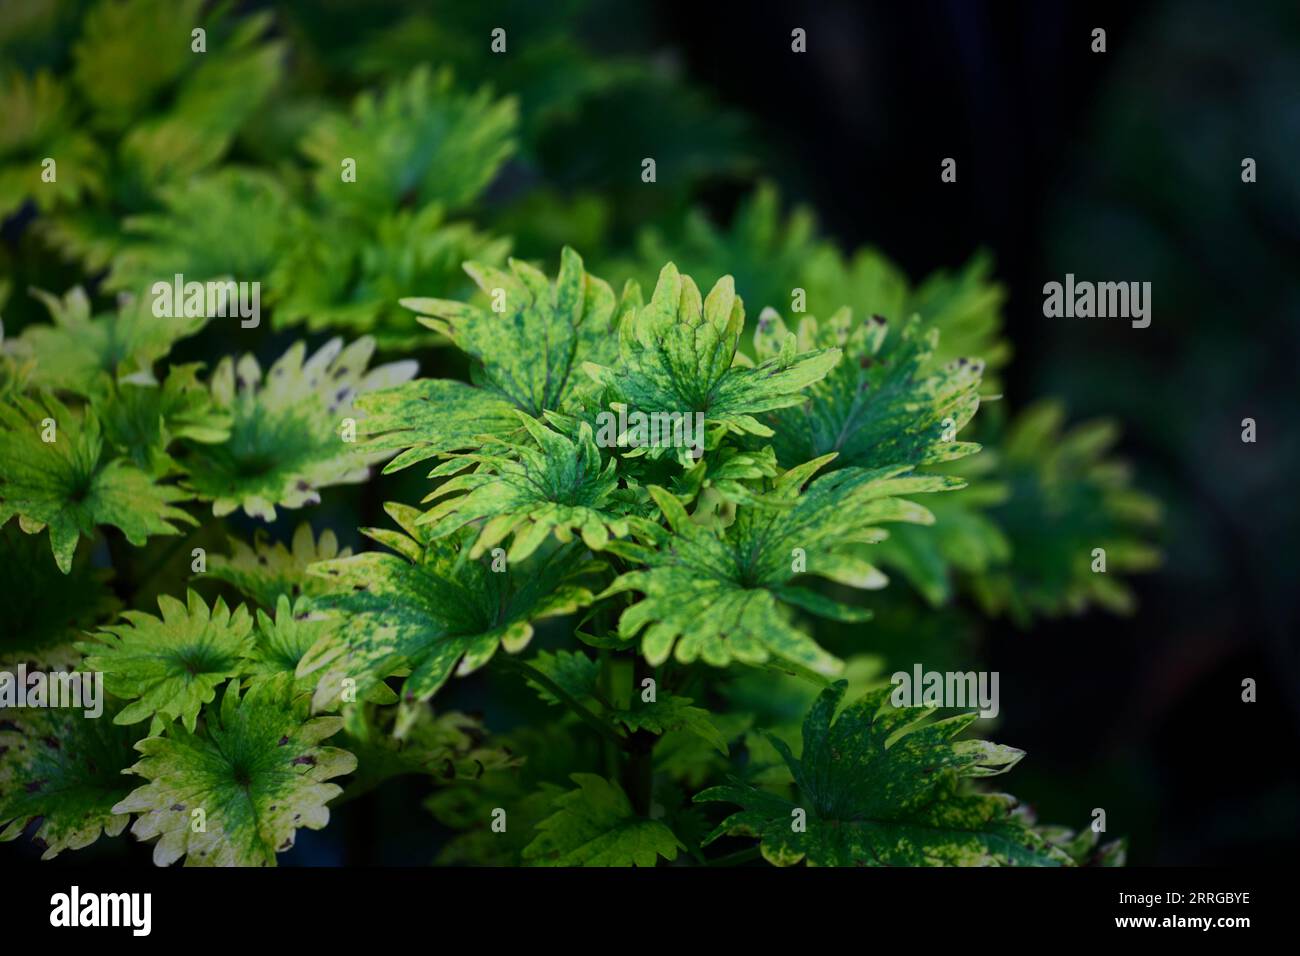 Close-up view of Coleus leaves Stock Photo